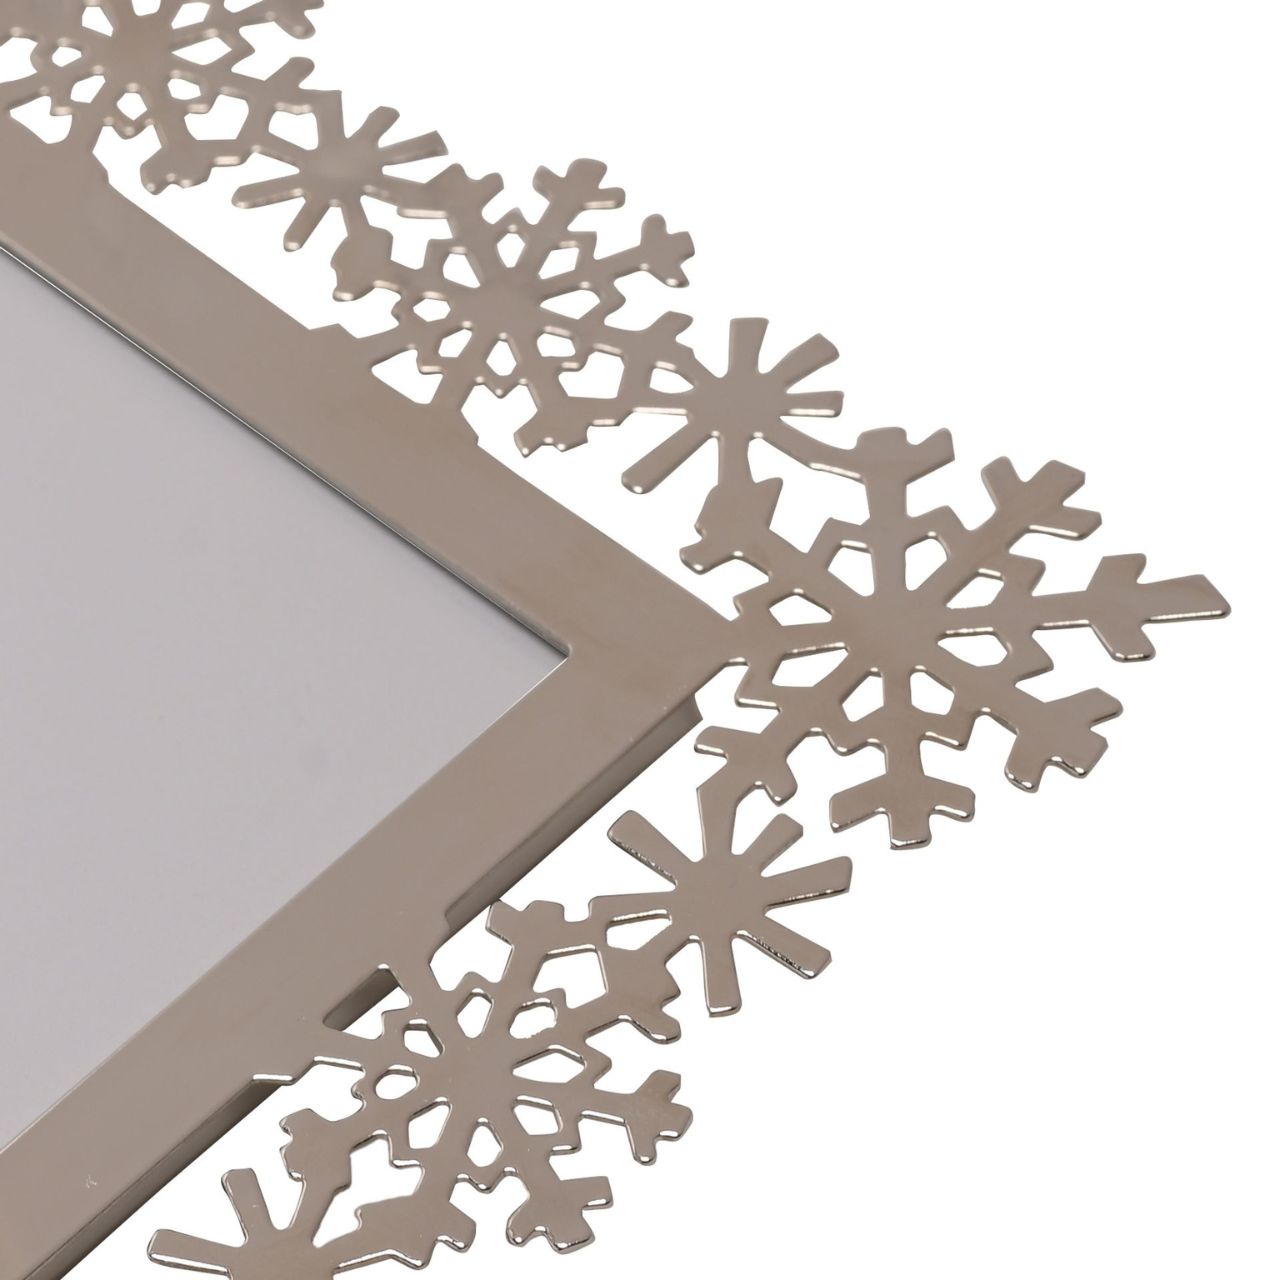 Silverplated Christmas Snowflake Photo Frame 4" x 6"  A silver plated snowflake photo frame.  This glistening frame provides a festive display for photographs of loved ones at Christmas time.